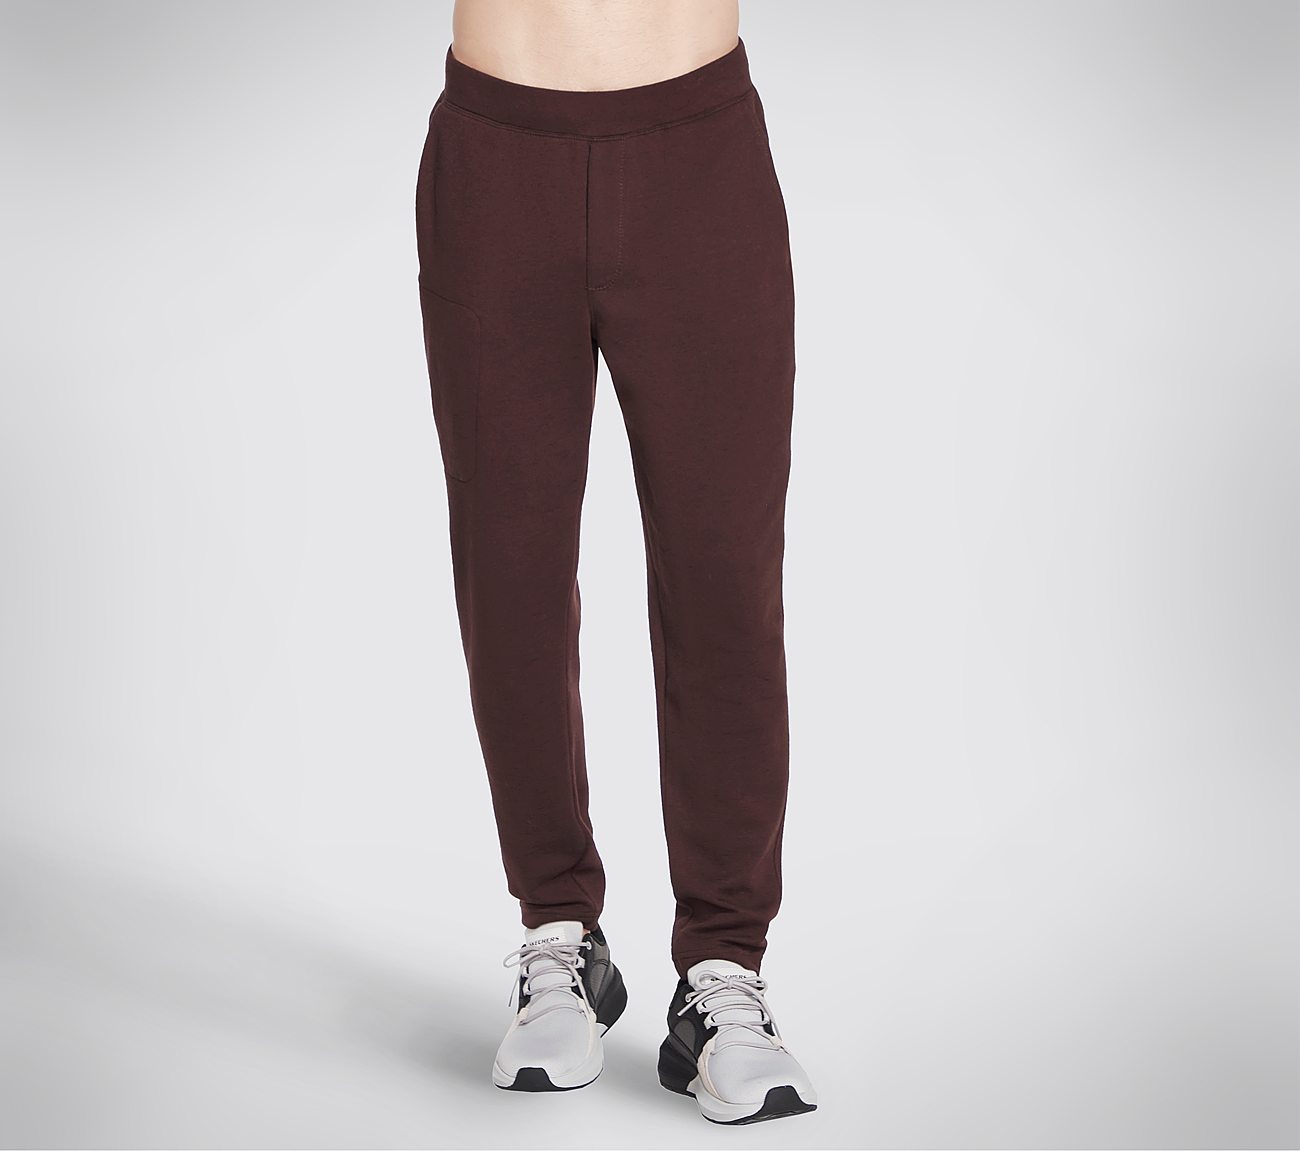 THE GOWALK PANT STROLL, BURGUNDY Apparel Lateral View